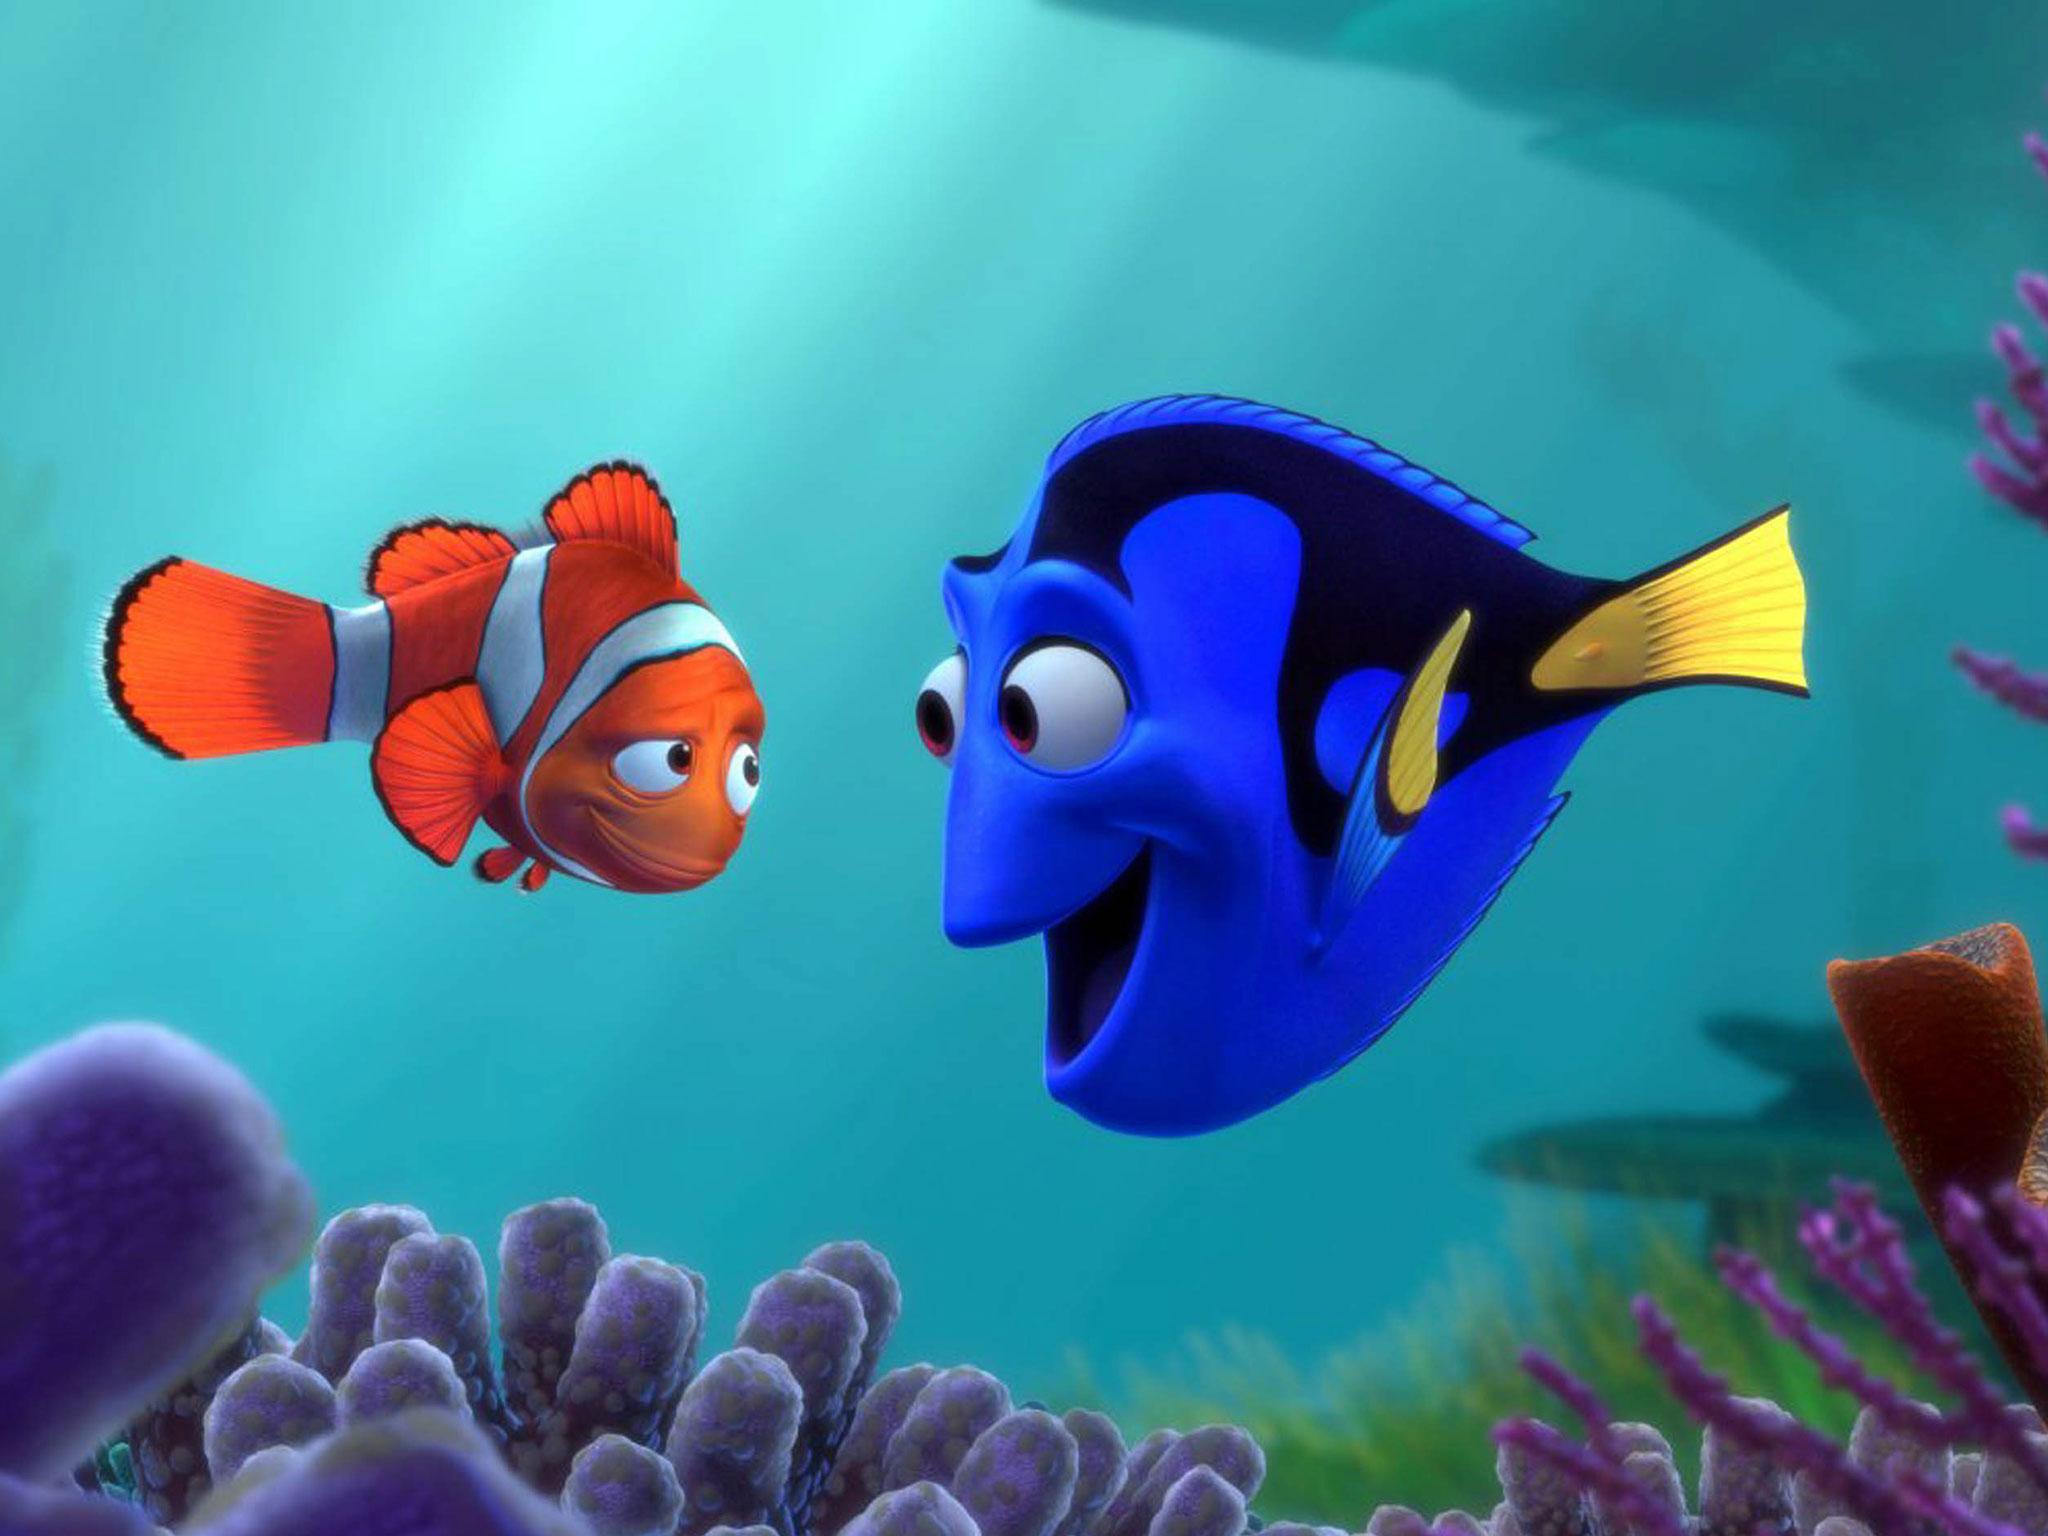 Why Are Finding Nemo and Finding Dory Such Enormous Hits?